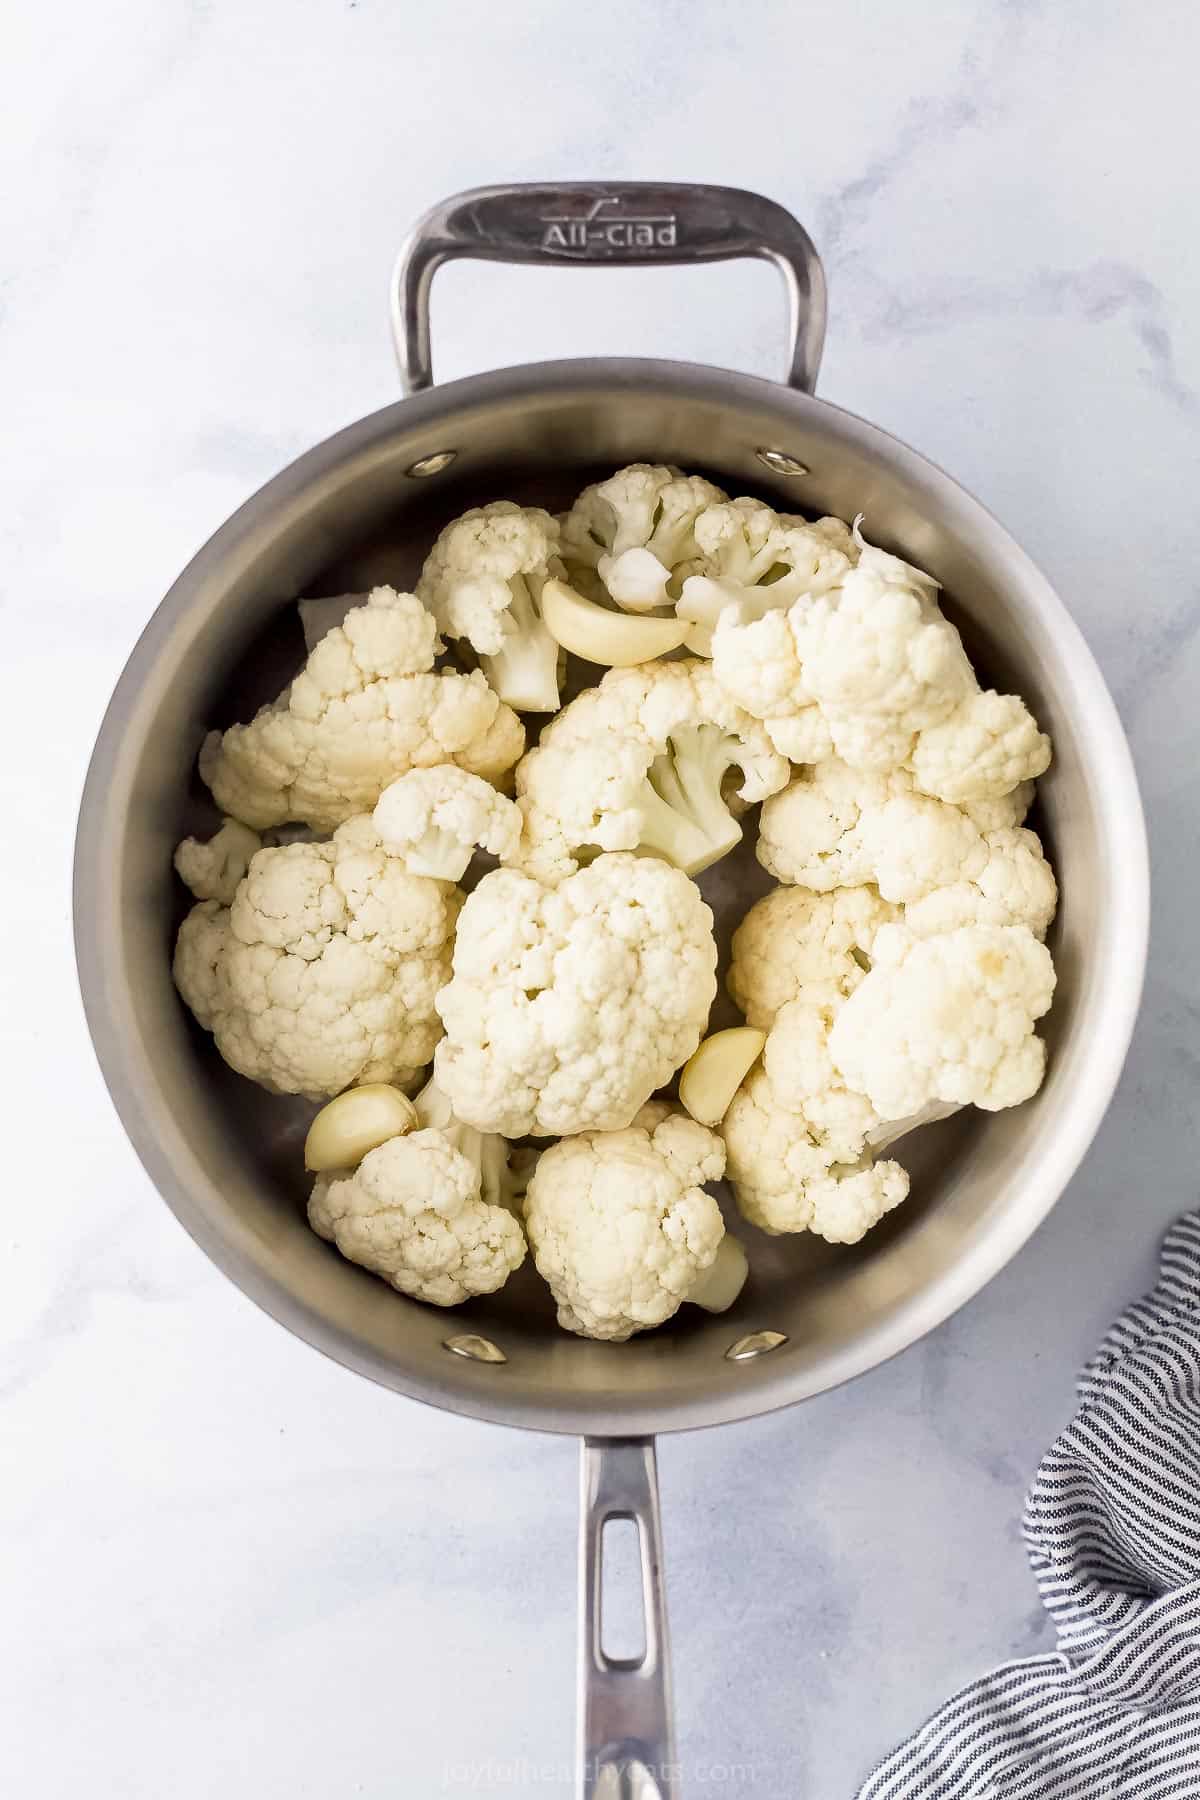 Uncooked cauliflower florets inside of a metal pot on a white surface